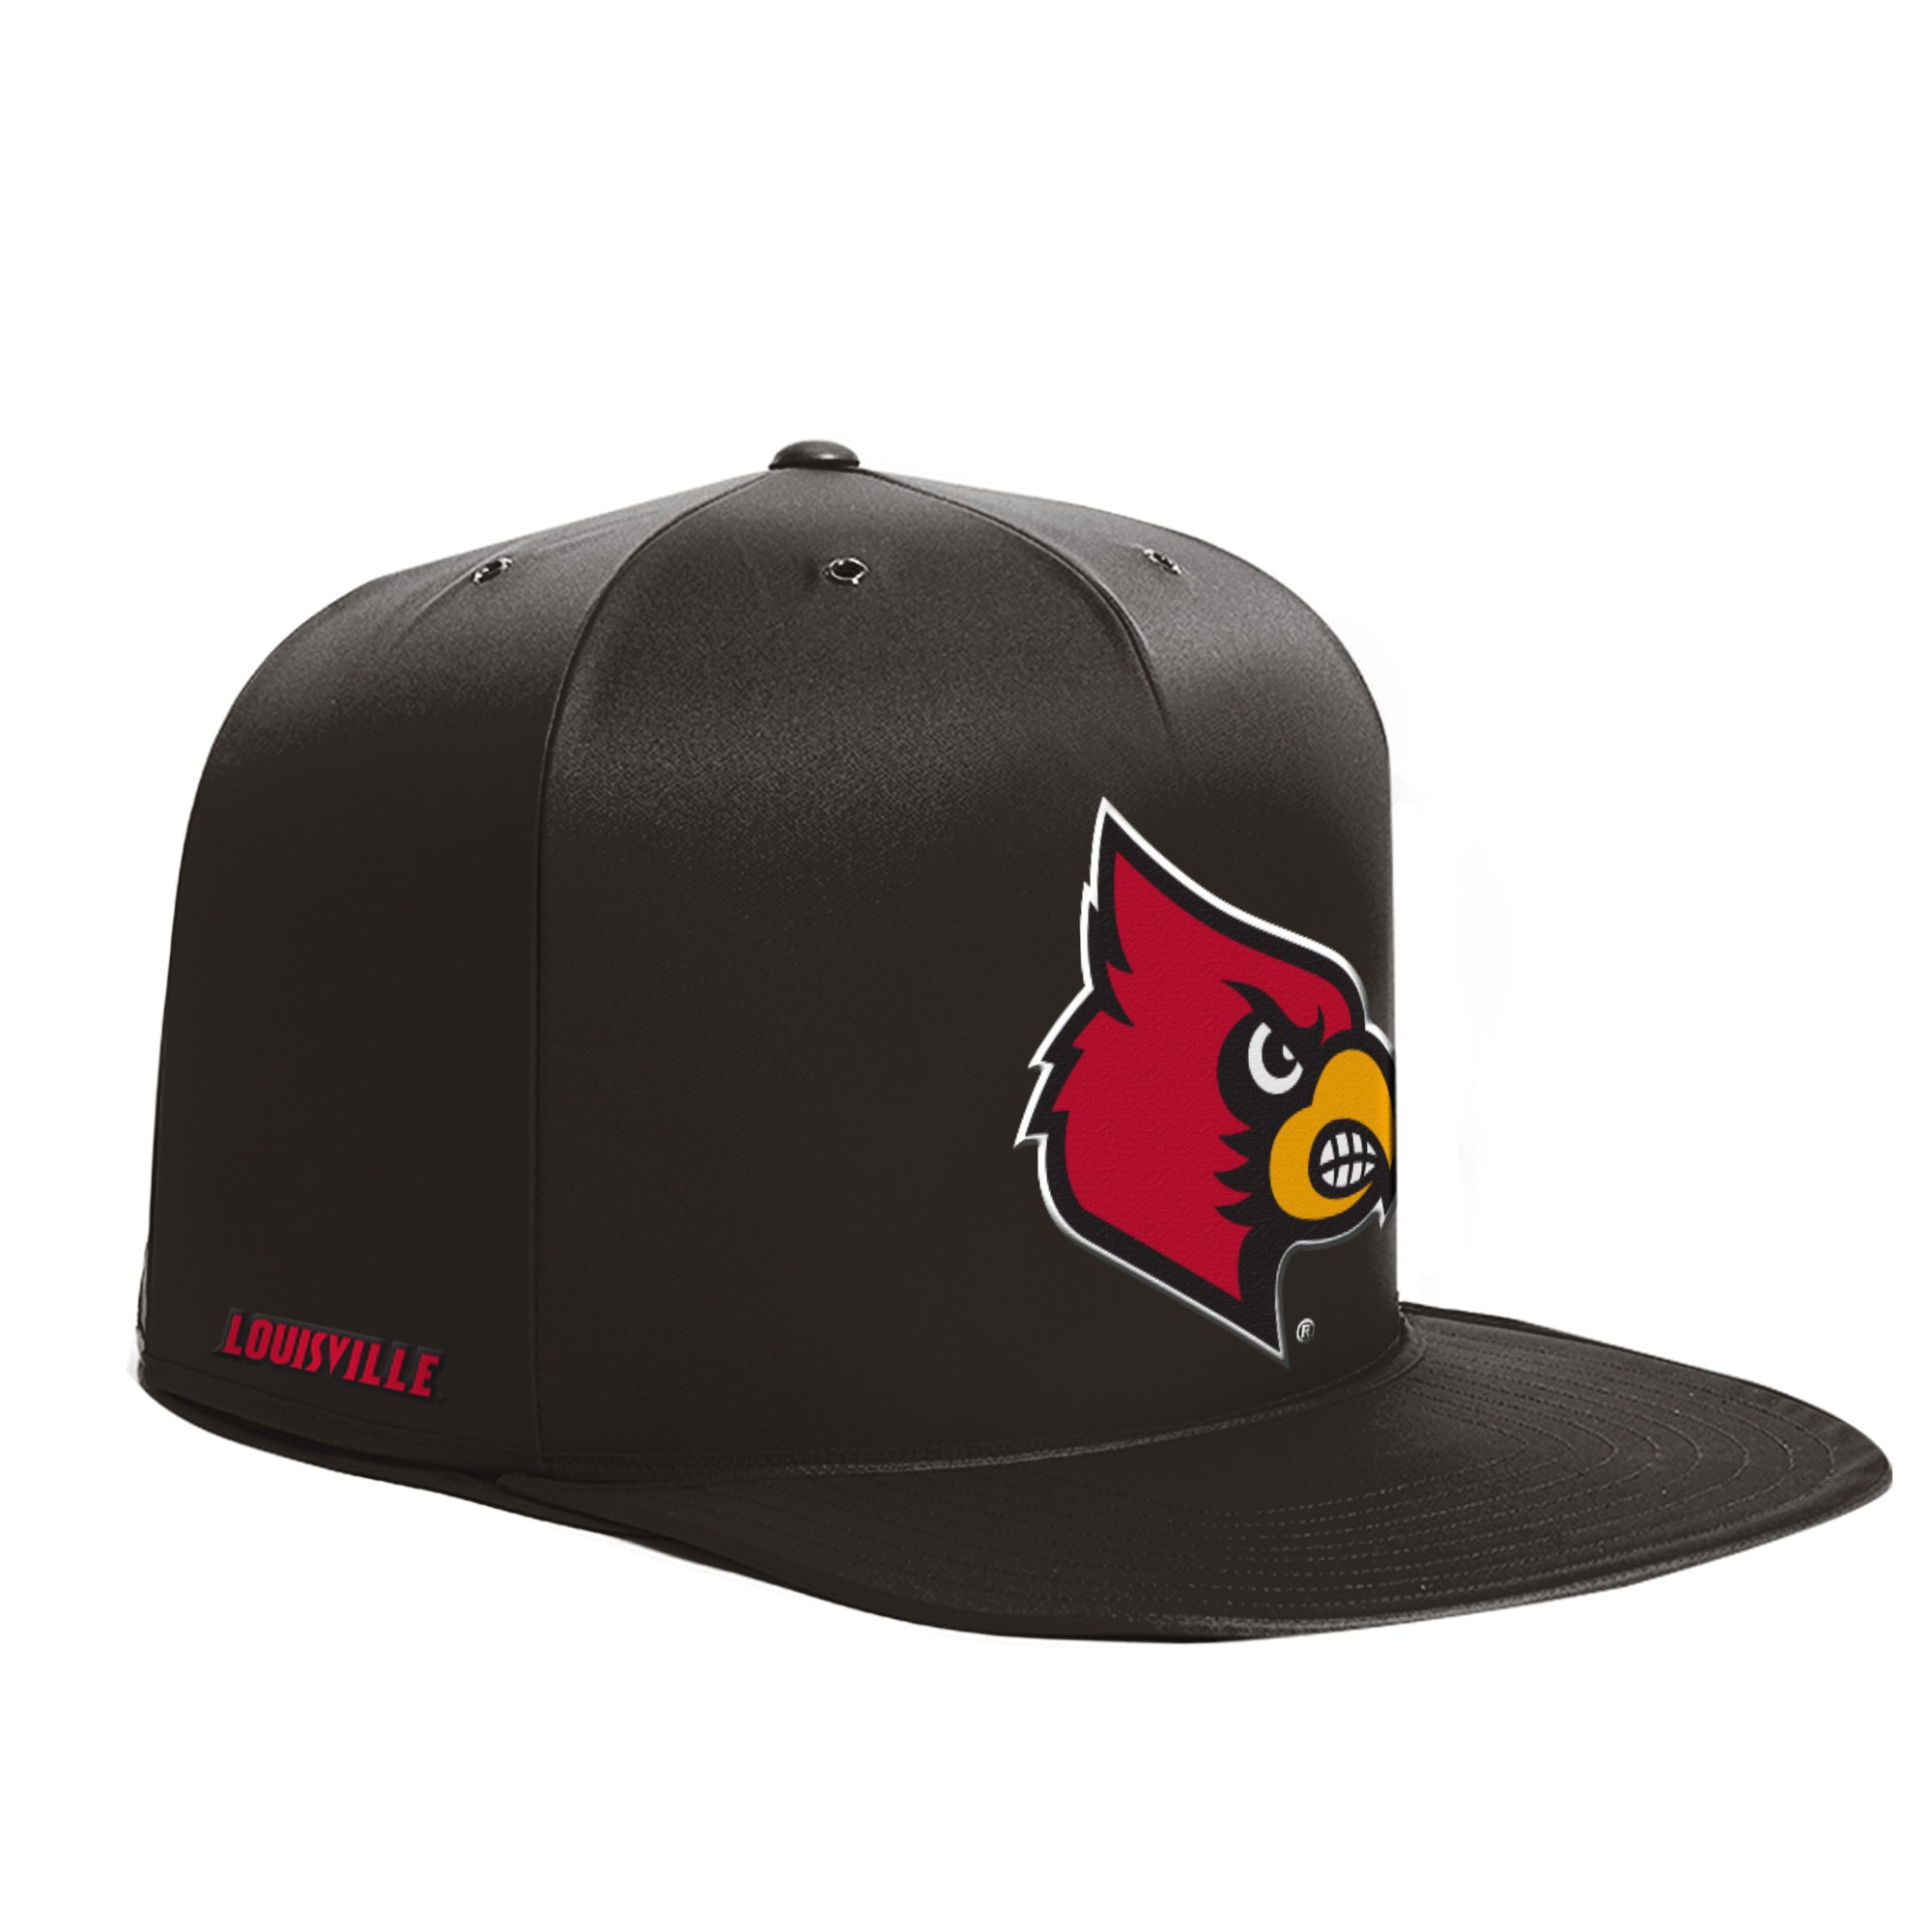 University of Louisville Fitted Hat, Louisville Cardinals Fitted Caps